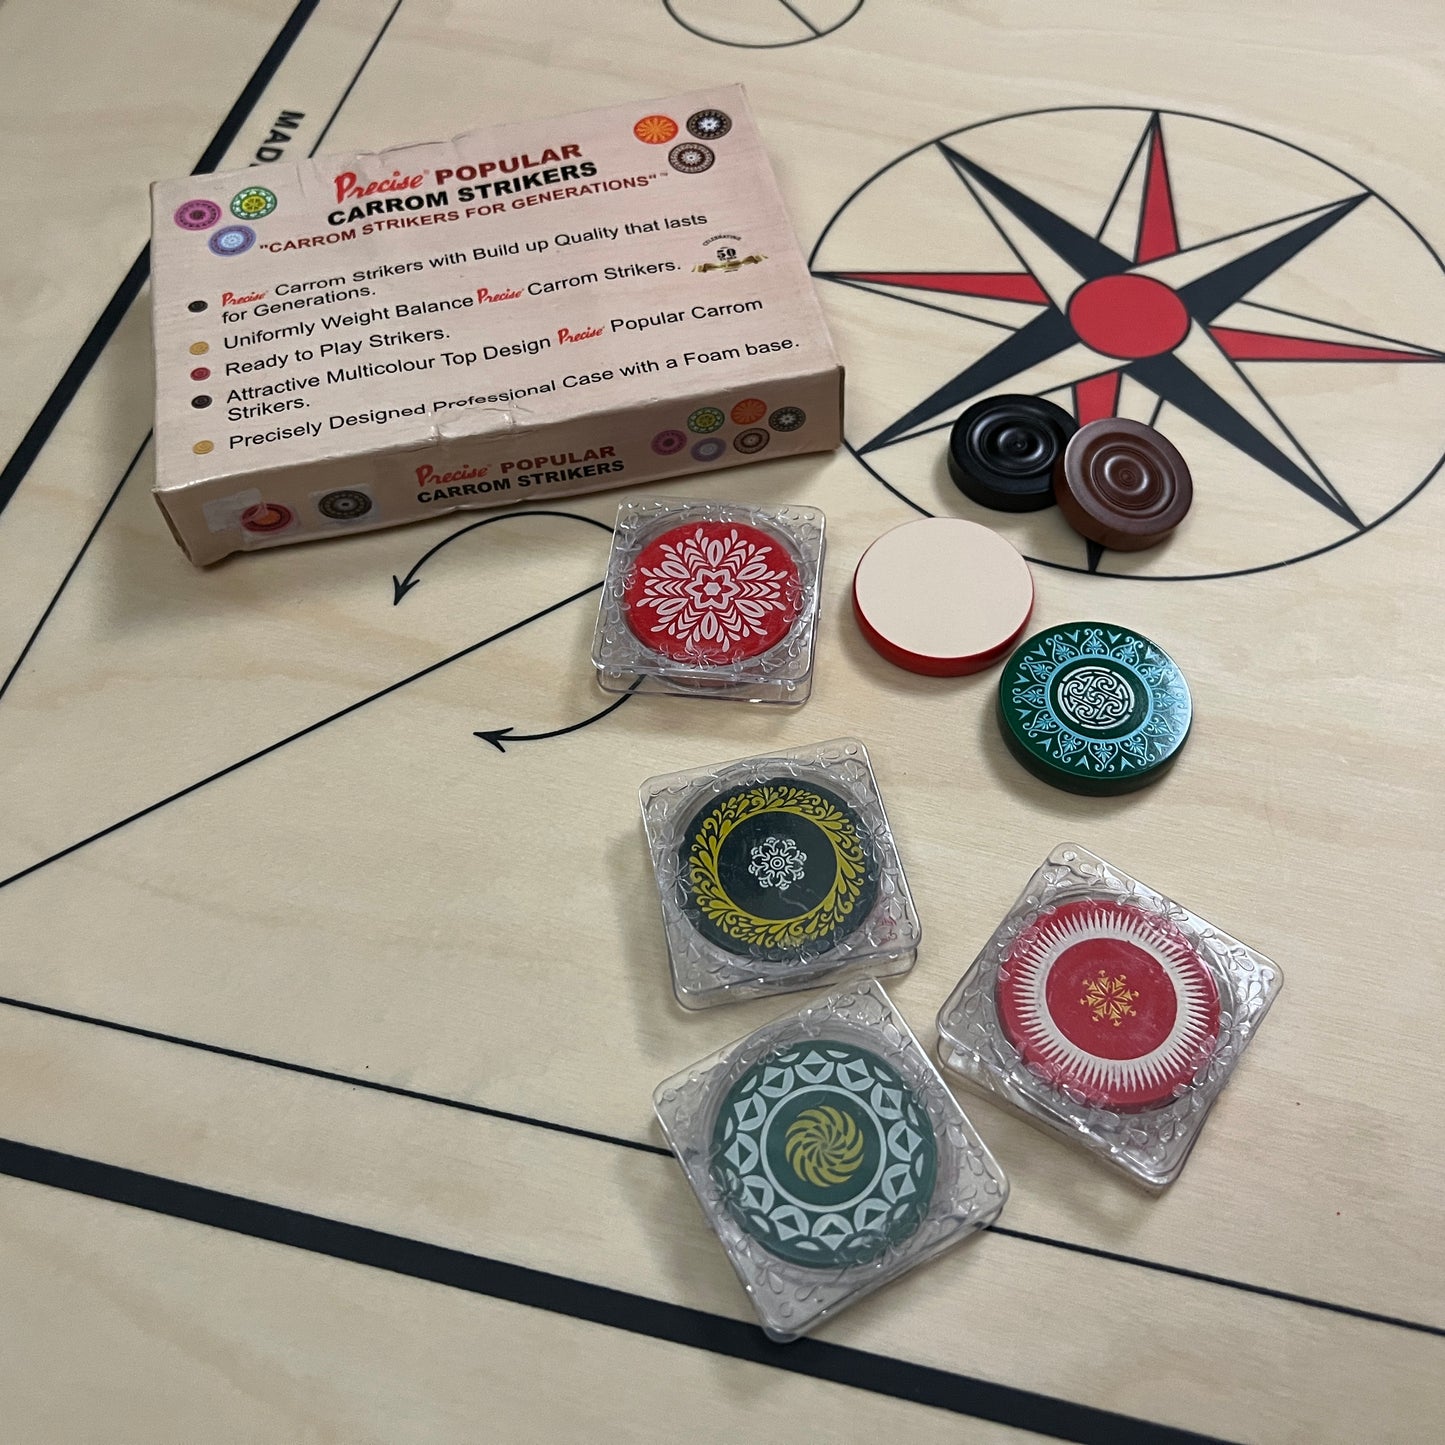 Home-use Precise Popular carrom striker, made of highly polished ceramic, weighs approximately 15 grams, each with a unique design, sold exclusively by Black Ash Sports.